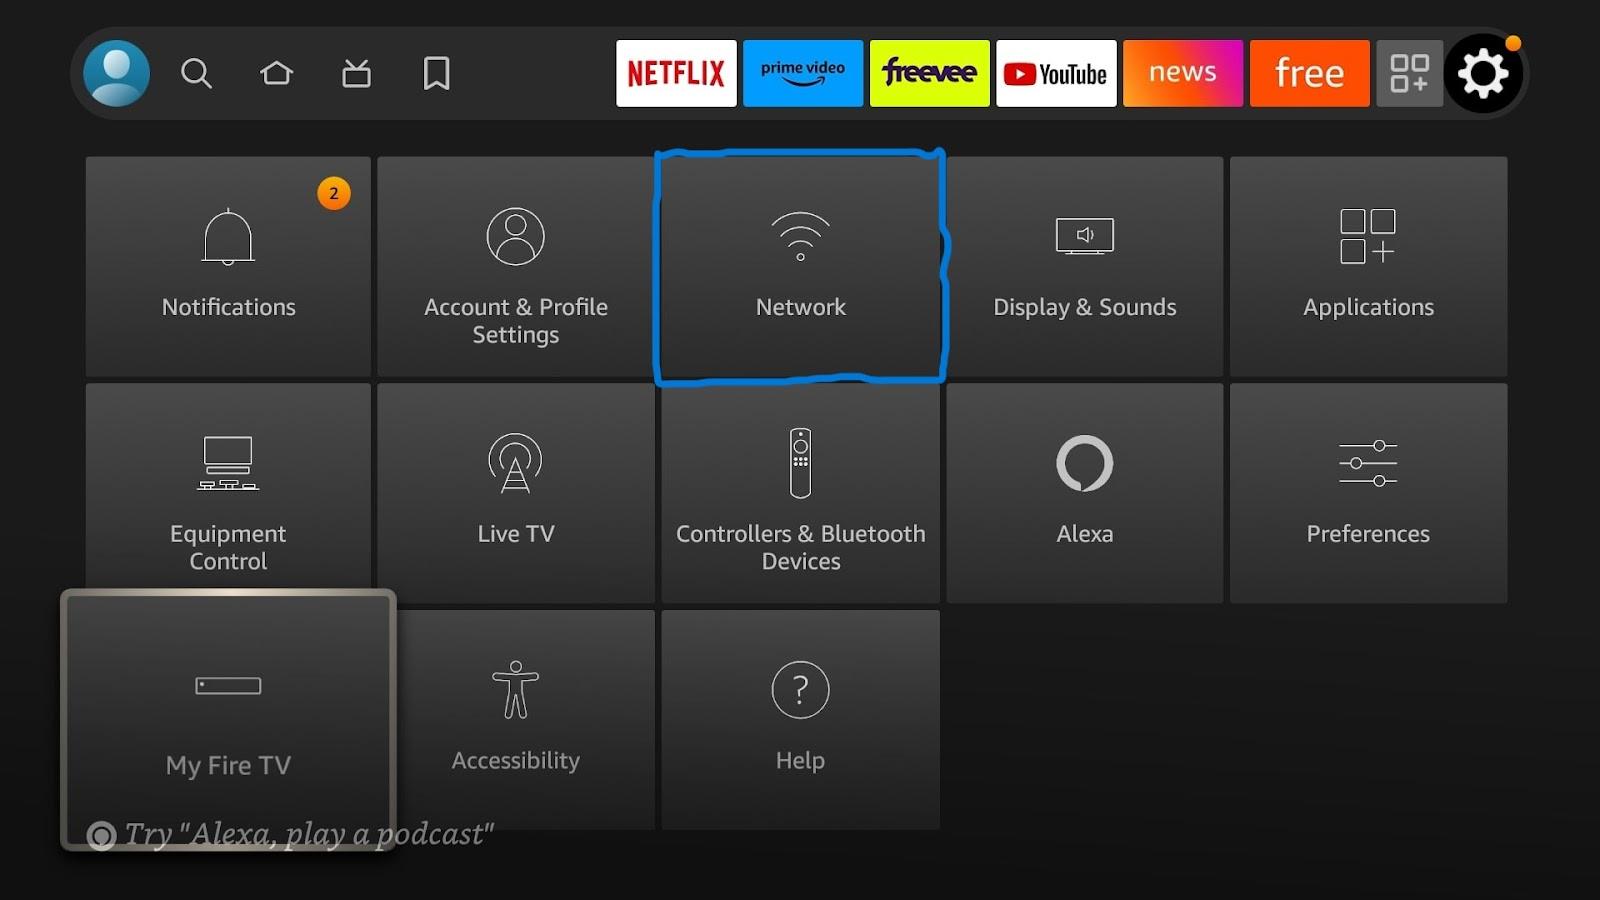 Select Network under Settings.